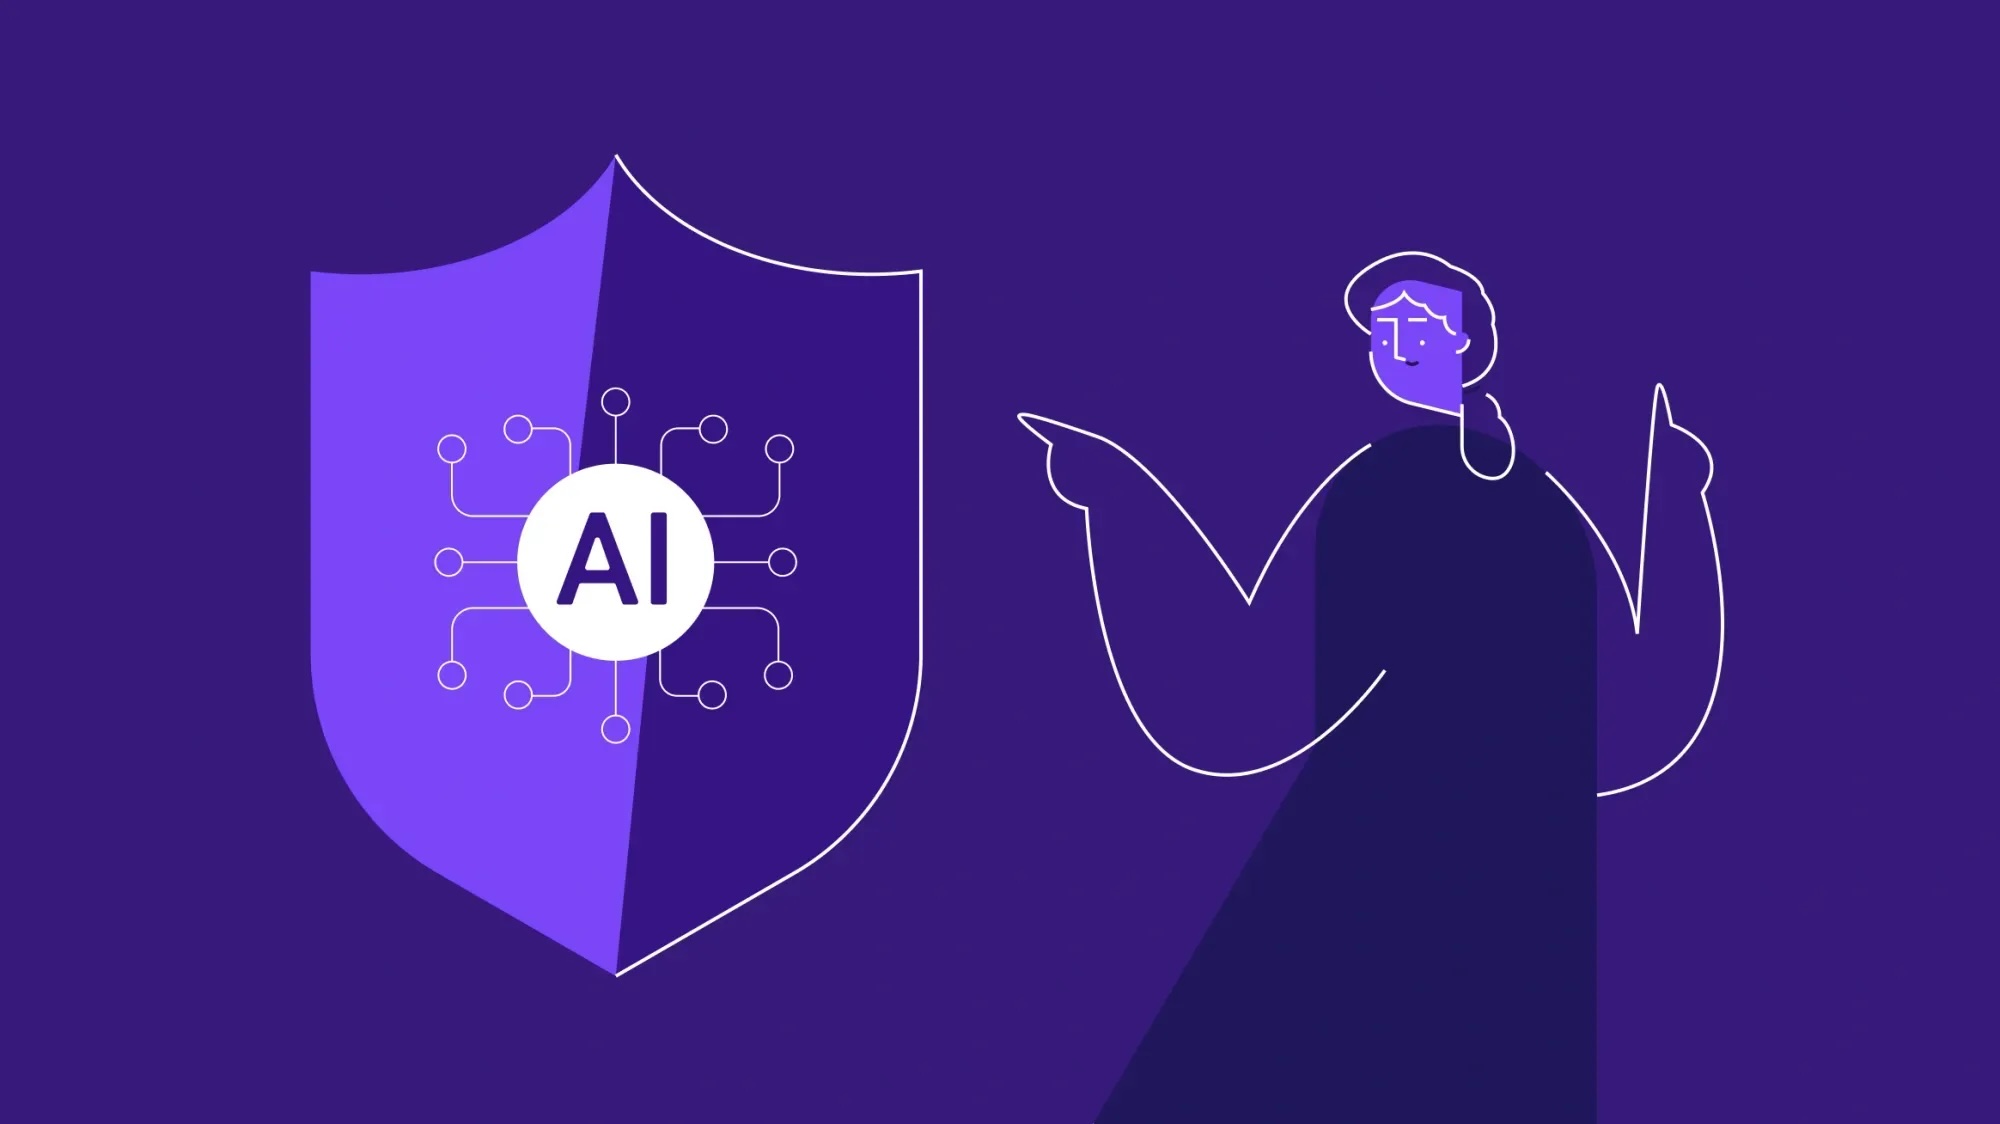 Building your own AI app? Here are 3 risks you need to know about—and how to mitigate them. 